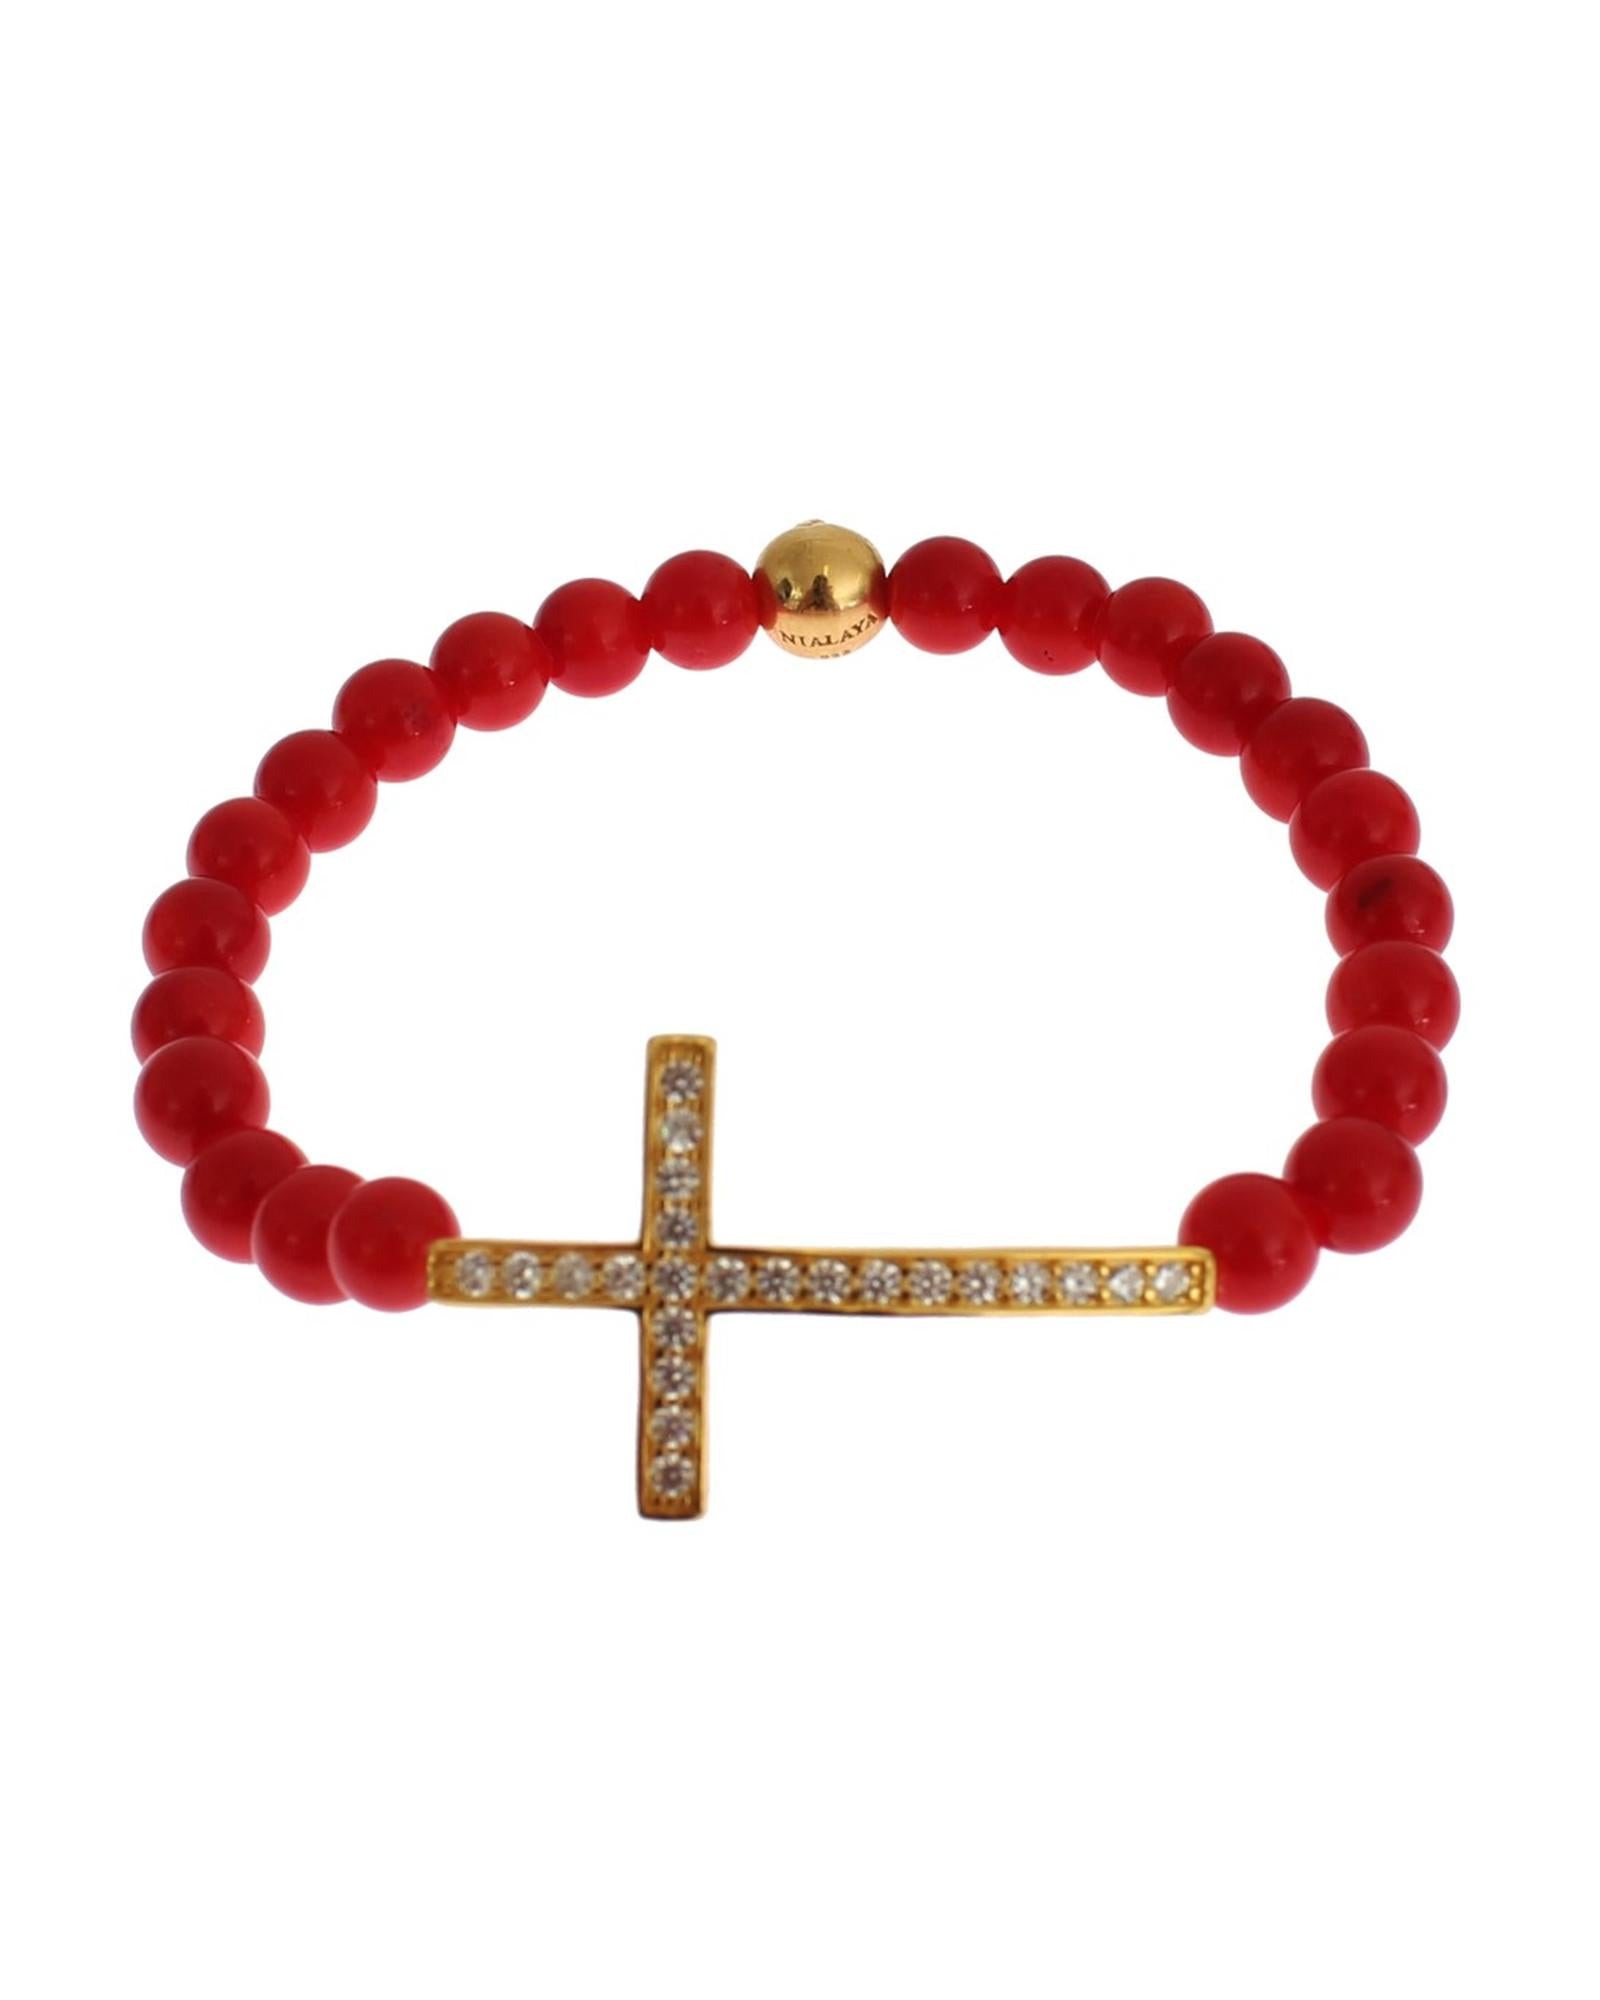 Authentic NIALAYA Gold Plated Silver Bracelet with Red Coral Beads and CZ Diamond Cross S Women